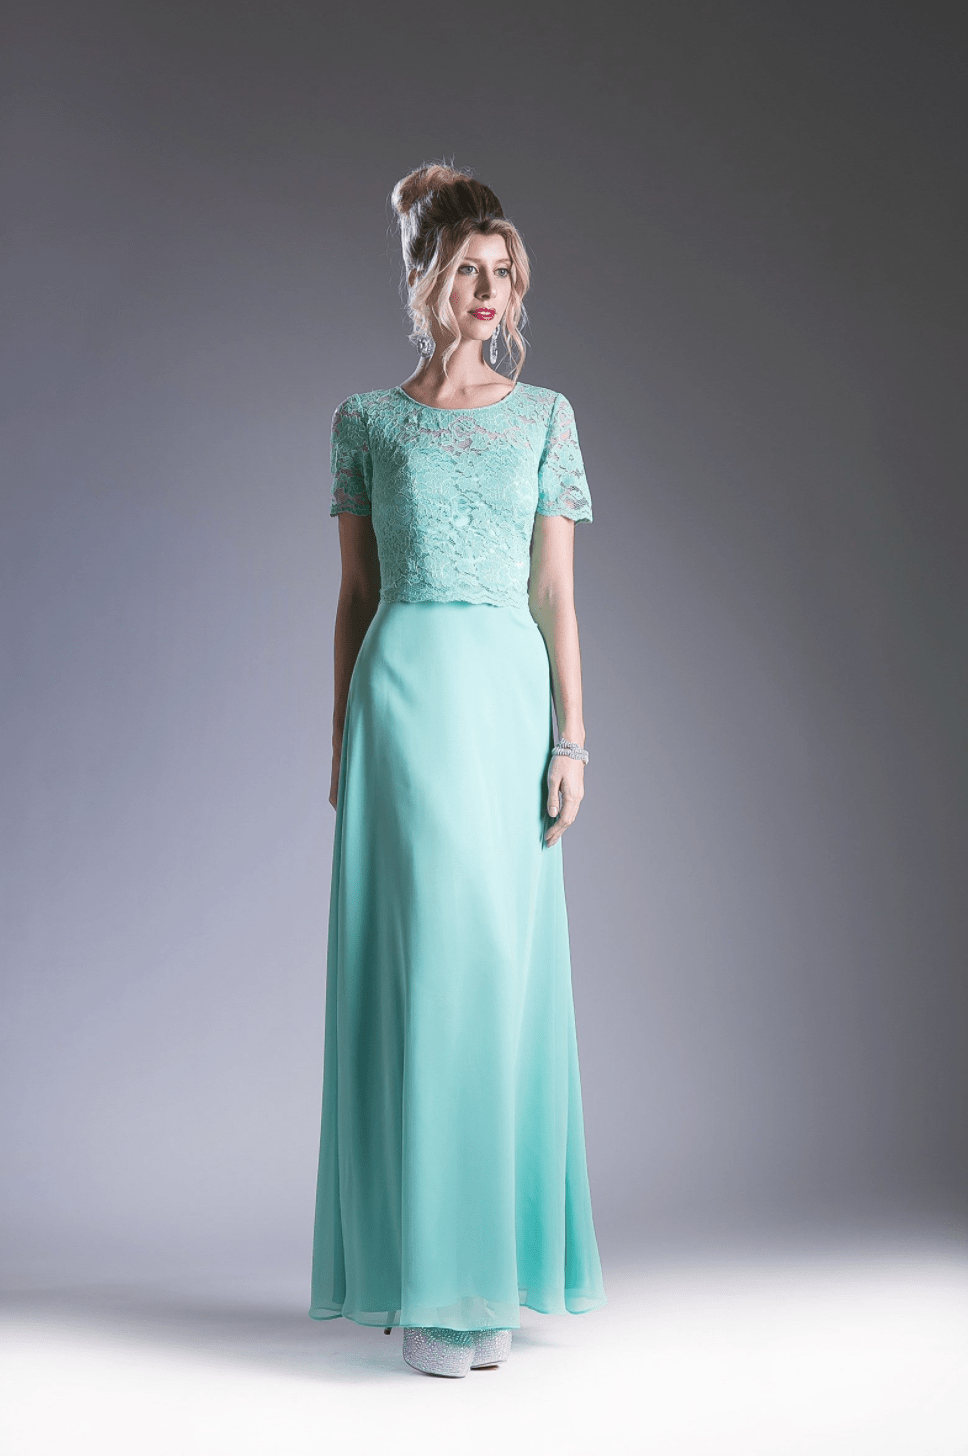 Chiffon Shoulder Sleeve Dress by Ladivine - NORMA REED